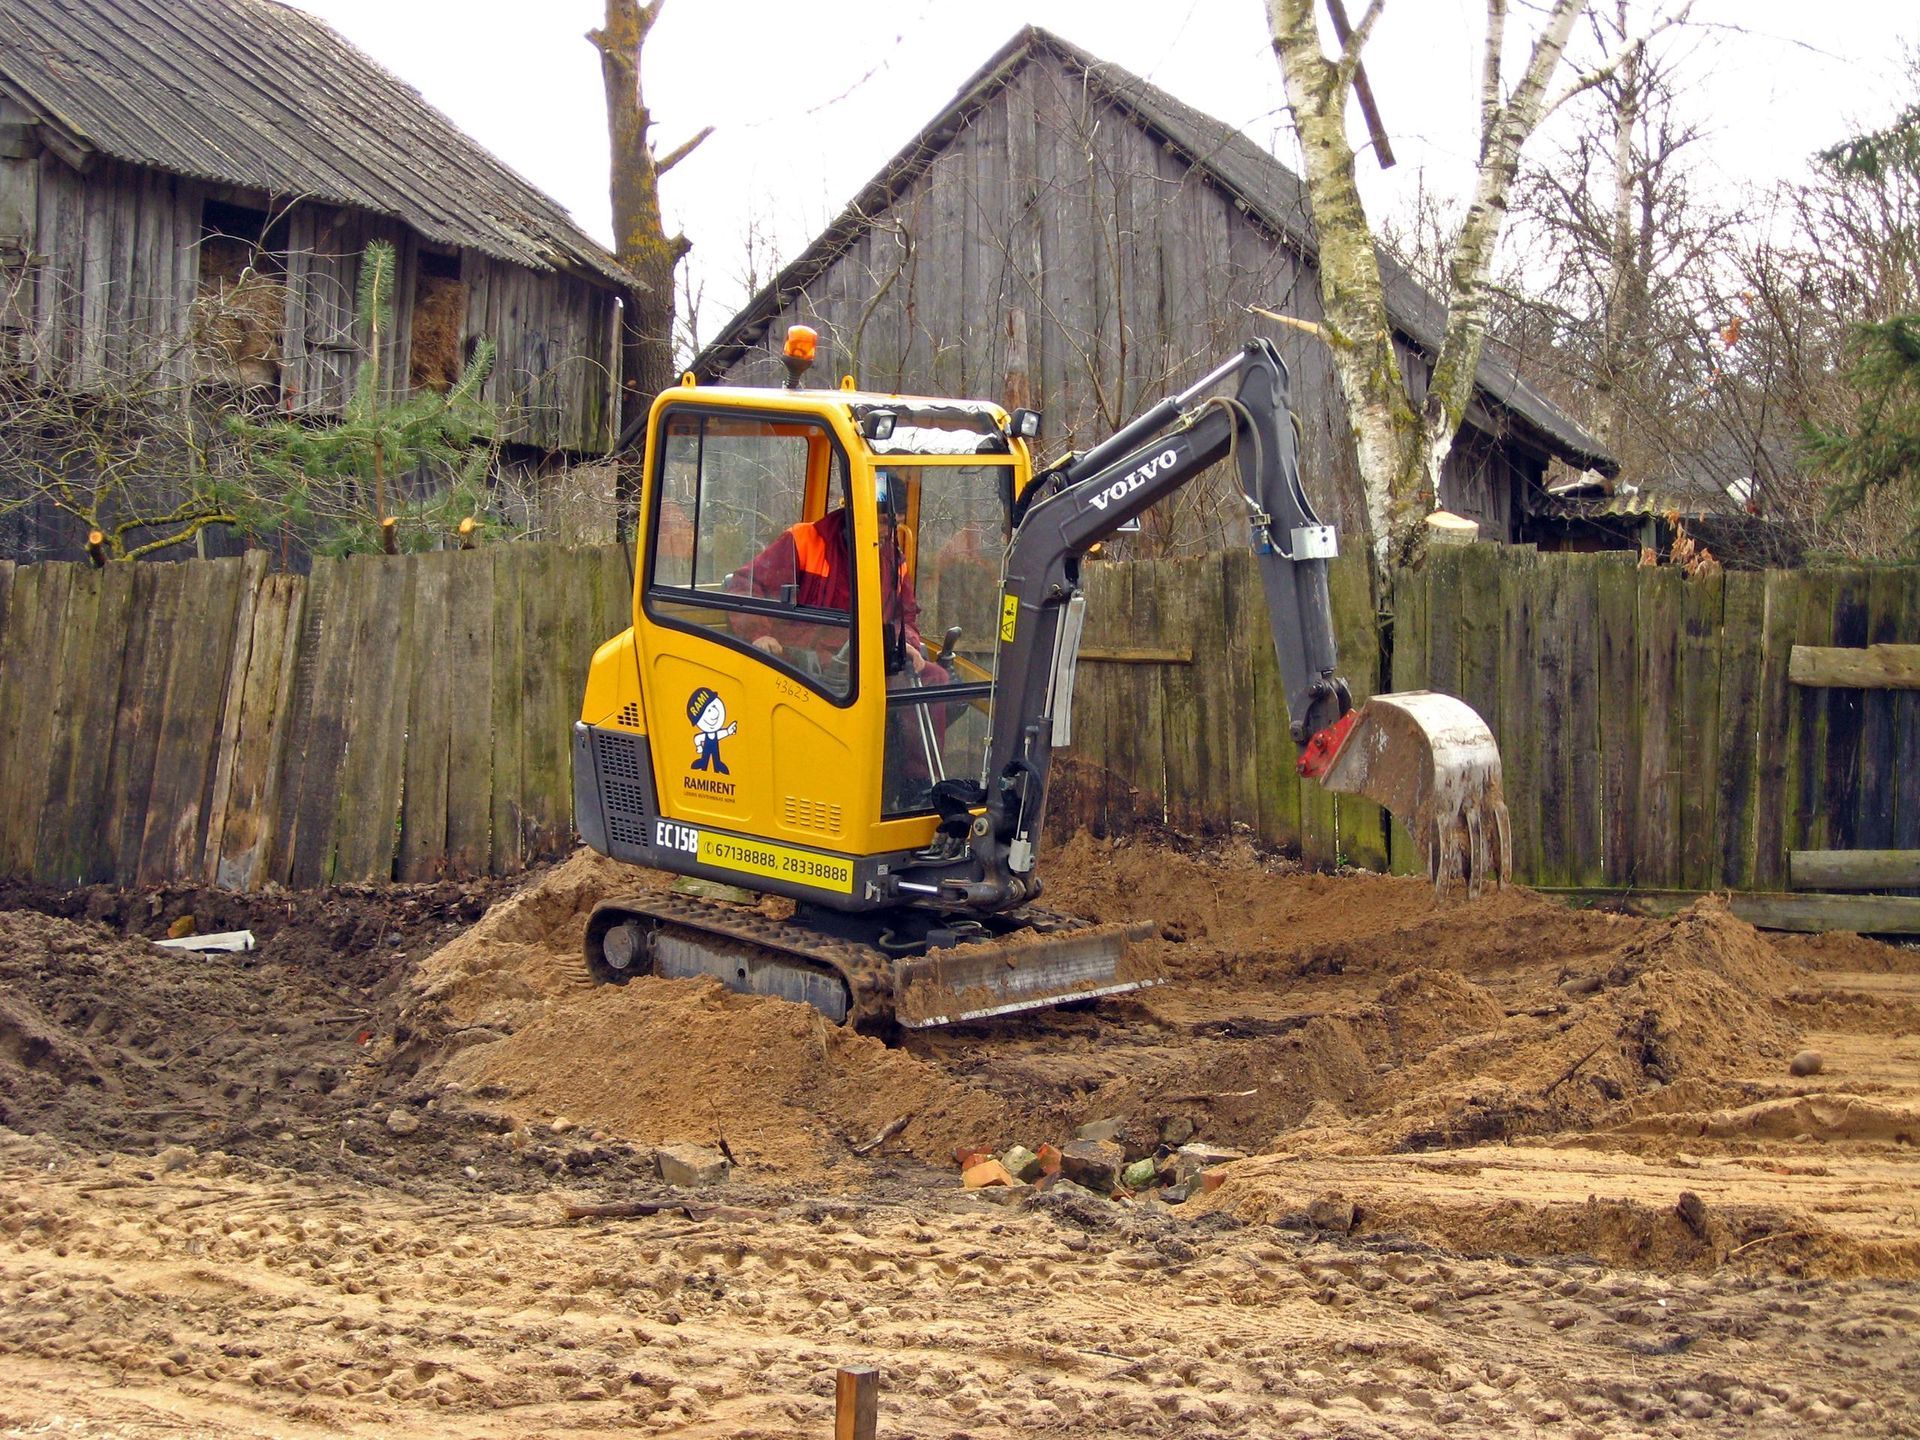 a yellow excavator is digging a hole in the dirt .